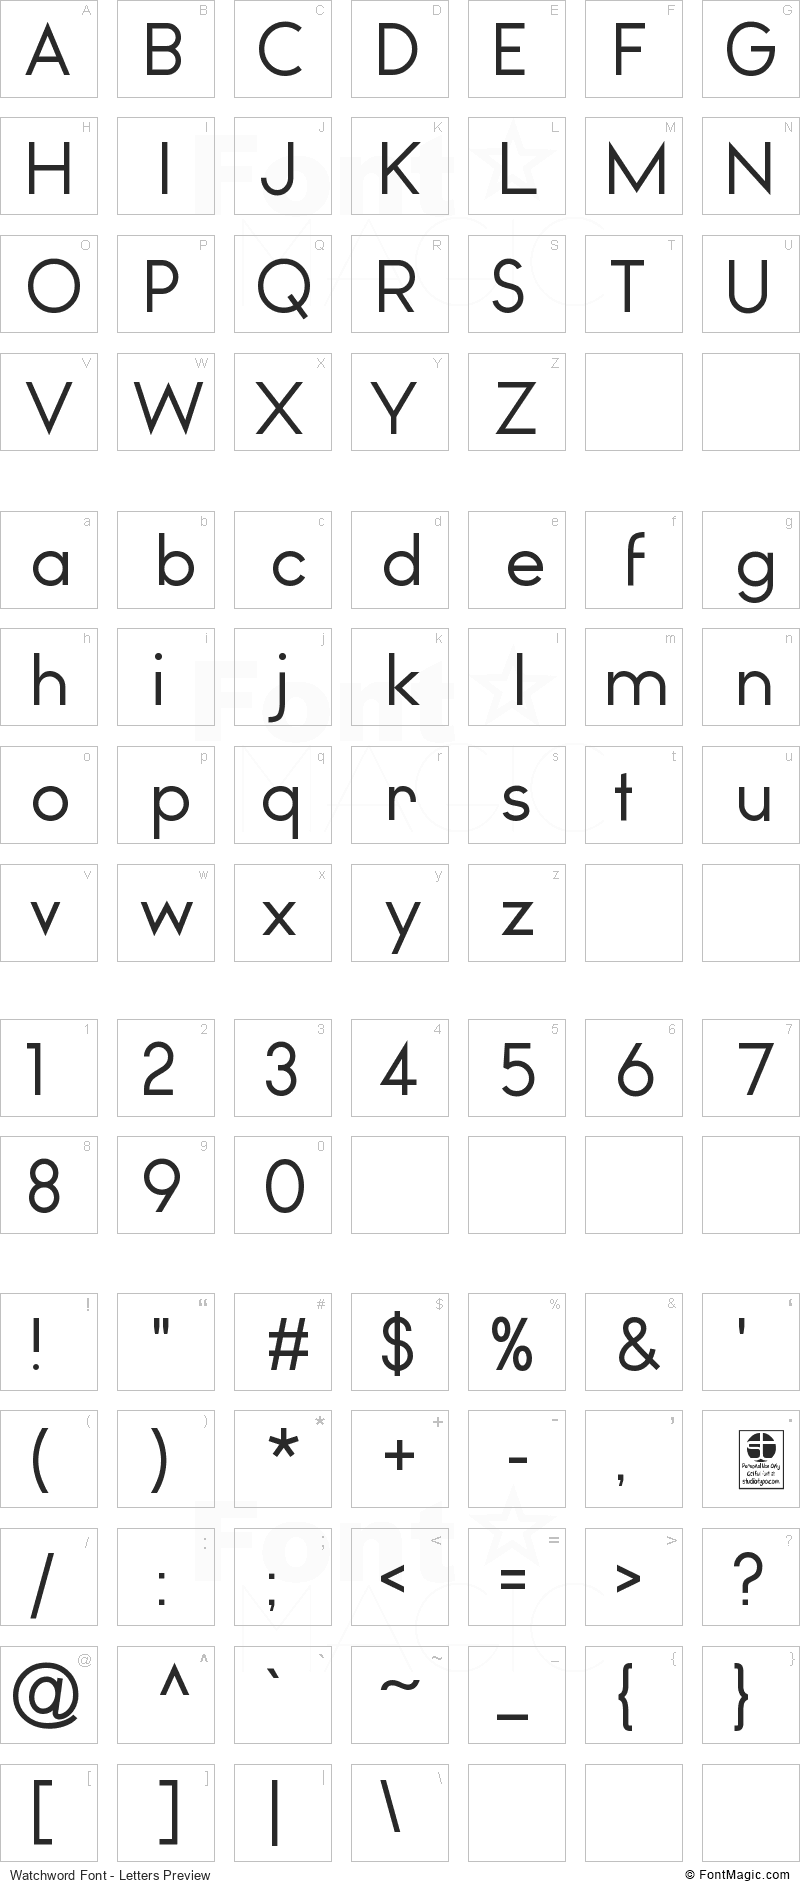 Watchword Font - All Latters Preview Chart